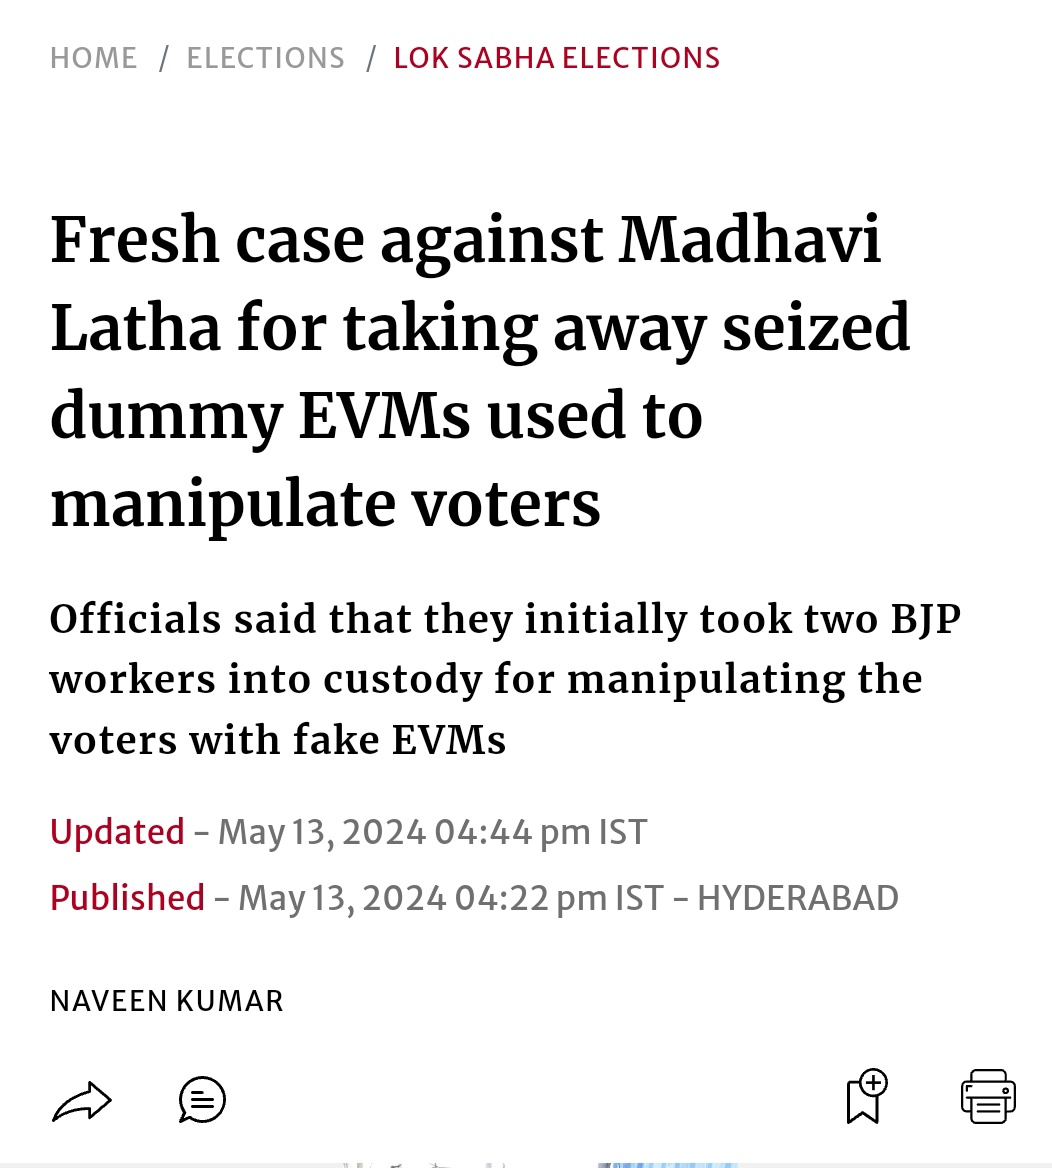 Mangalhat police filed a case against Madhavi Latha & BJP supporters for using fake EVMs to manipulate voters. Two BJP workers were detained initially. Madhavi intervened at the police station, securing their release & taking the confiscated dummy EVMs. Where is .@ECISVEEP?